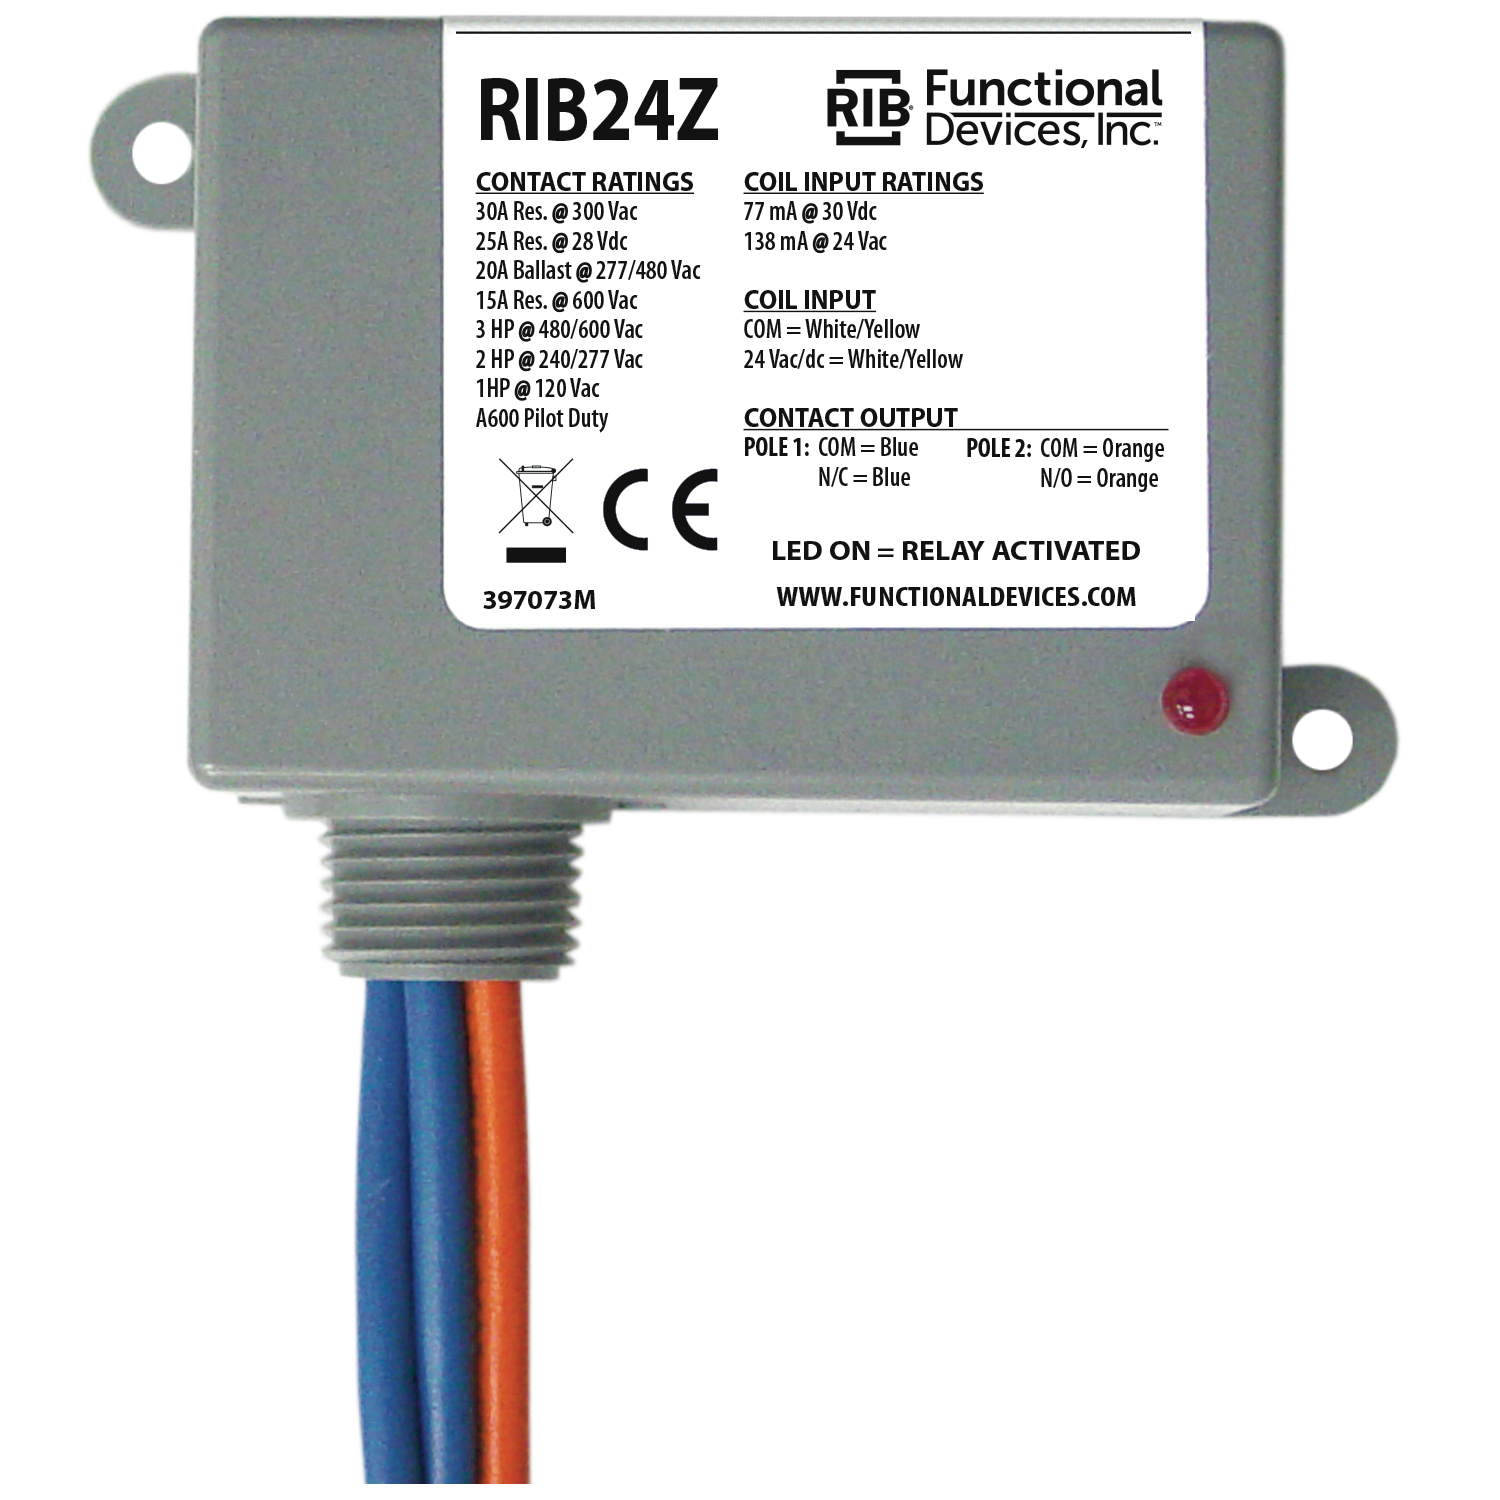 RIB Functional Devices Relay 24 Vac/dc or 120vac RIBU1C for sale online 